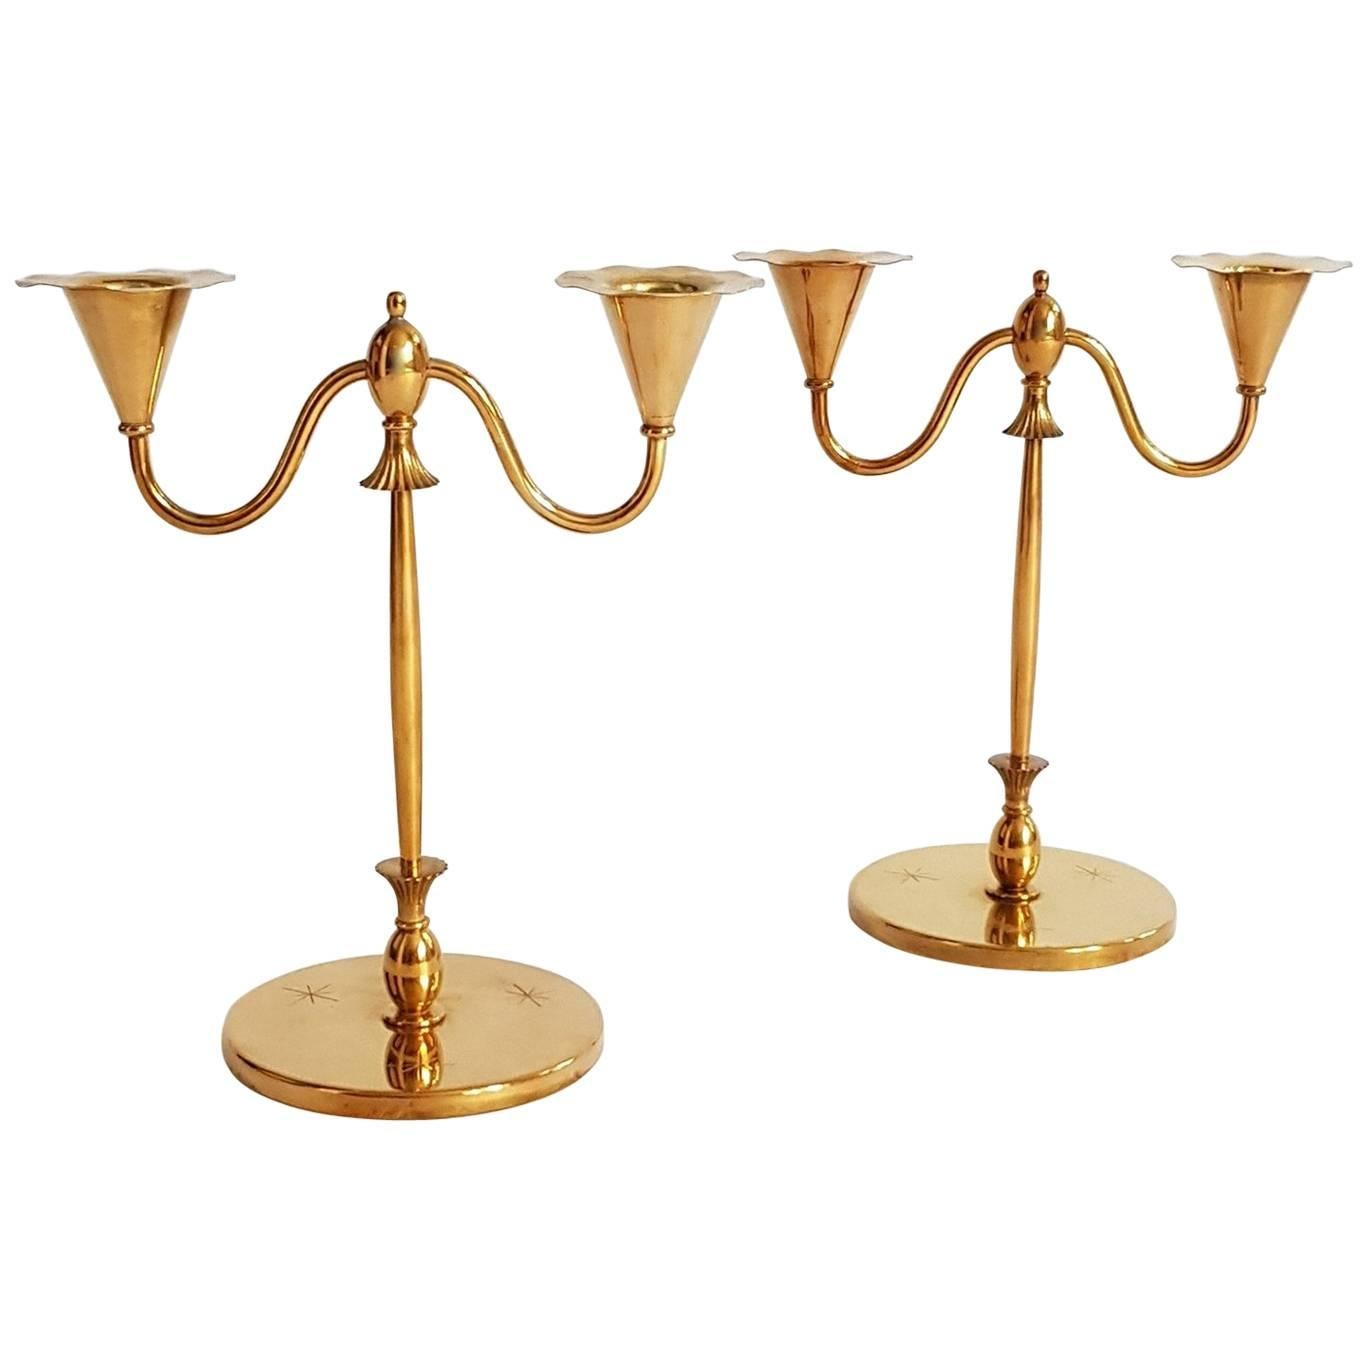 This pair of superb Swedish brass candlesticks is in excellent condition. Made in the so-called Swedish Grace style which was the Swedish equivalent to Art Deco during the late 1920s-early 1930s.